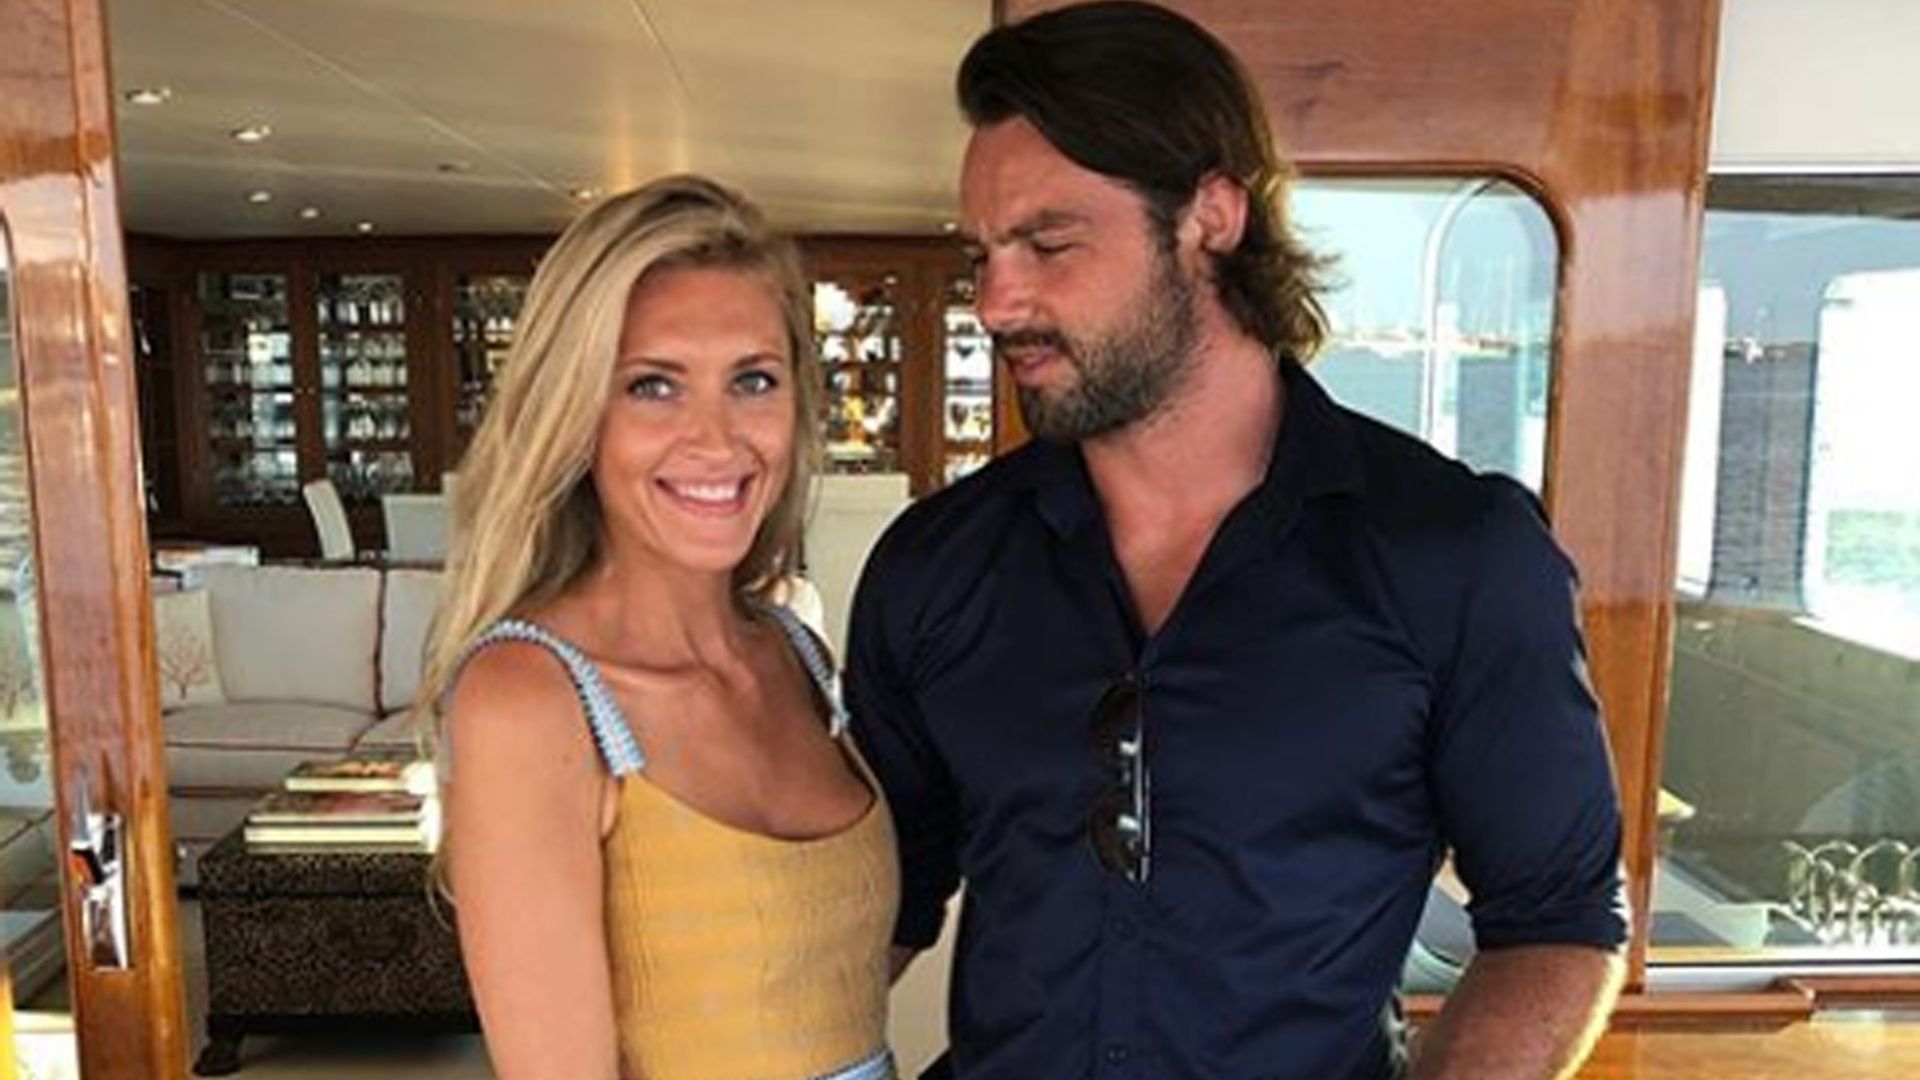 Surprise! Ben Foden marries new girlfriend after two weeks of dating - see photos